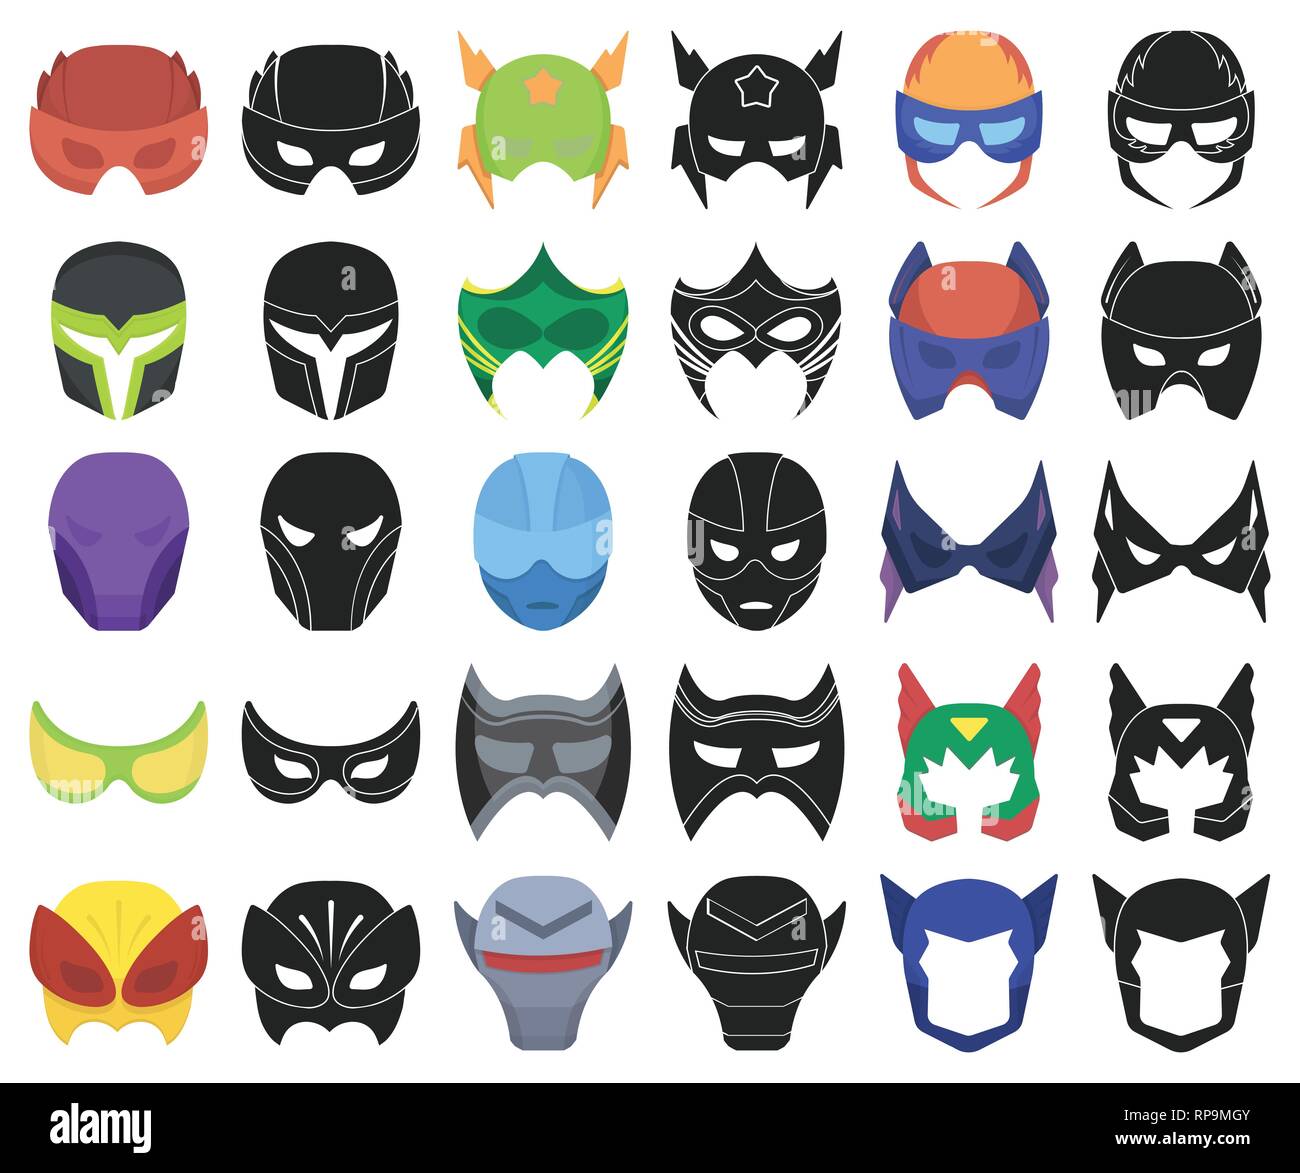 art,carnival,cartoon,black ,collection,color,colorful,costume,decoration,design,eye,eyes,face,festival,full,head,helmet,hero,holiday,icon,illustration,image,isolated,logo, mask,set,sign,superhero,superheros,symbol,vector,web, Vector Vectors Stock  Vector ...